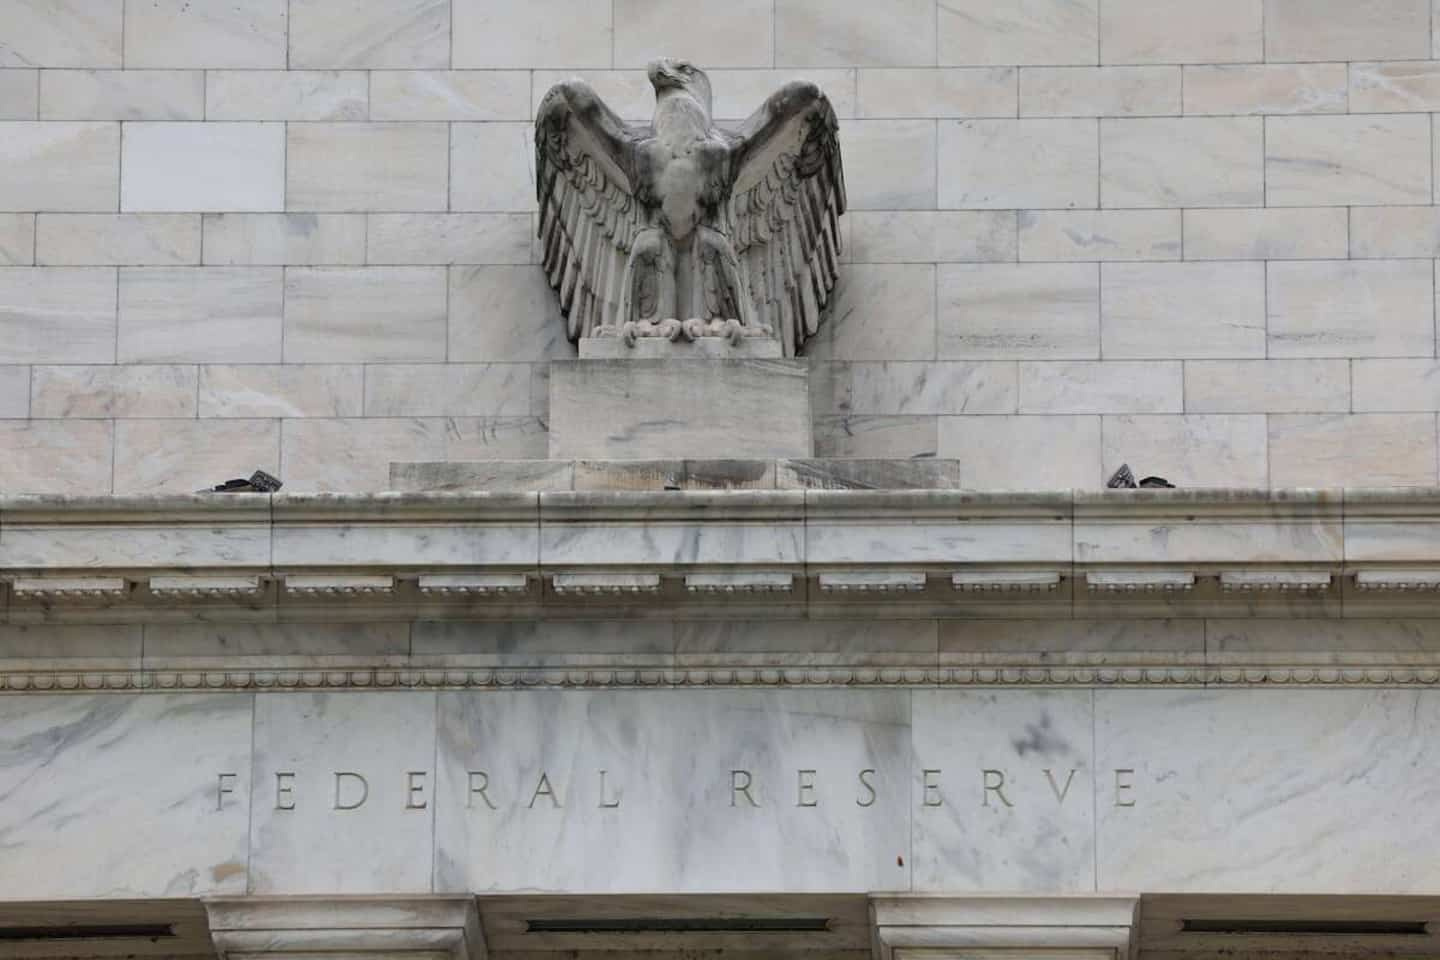 The Fed raises rates again by three-quarters of a point